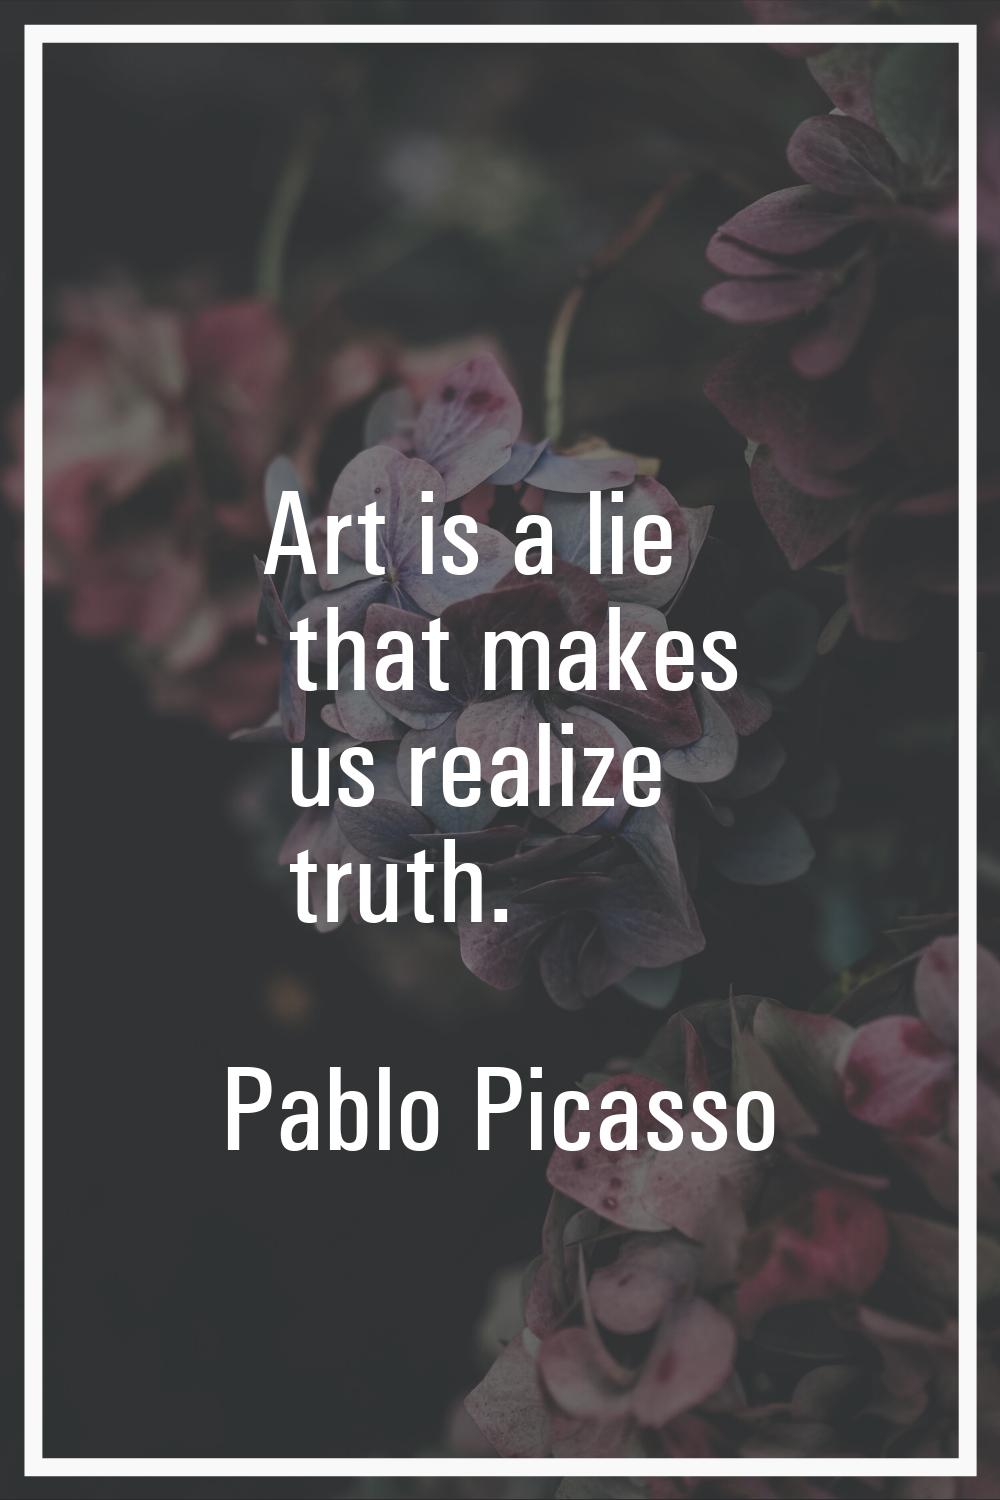 Art is a lie that makes us realize truth.